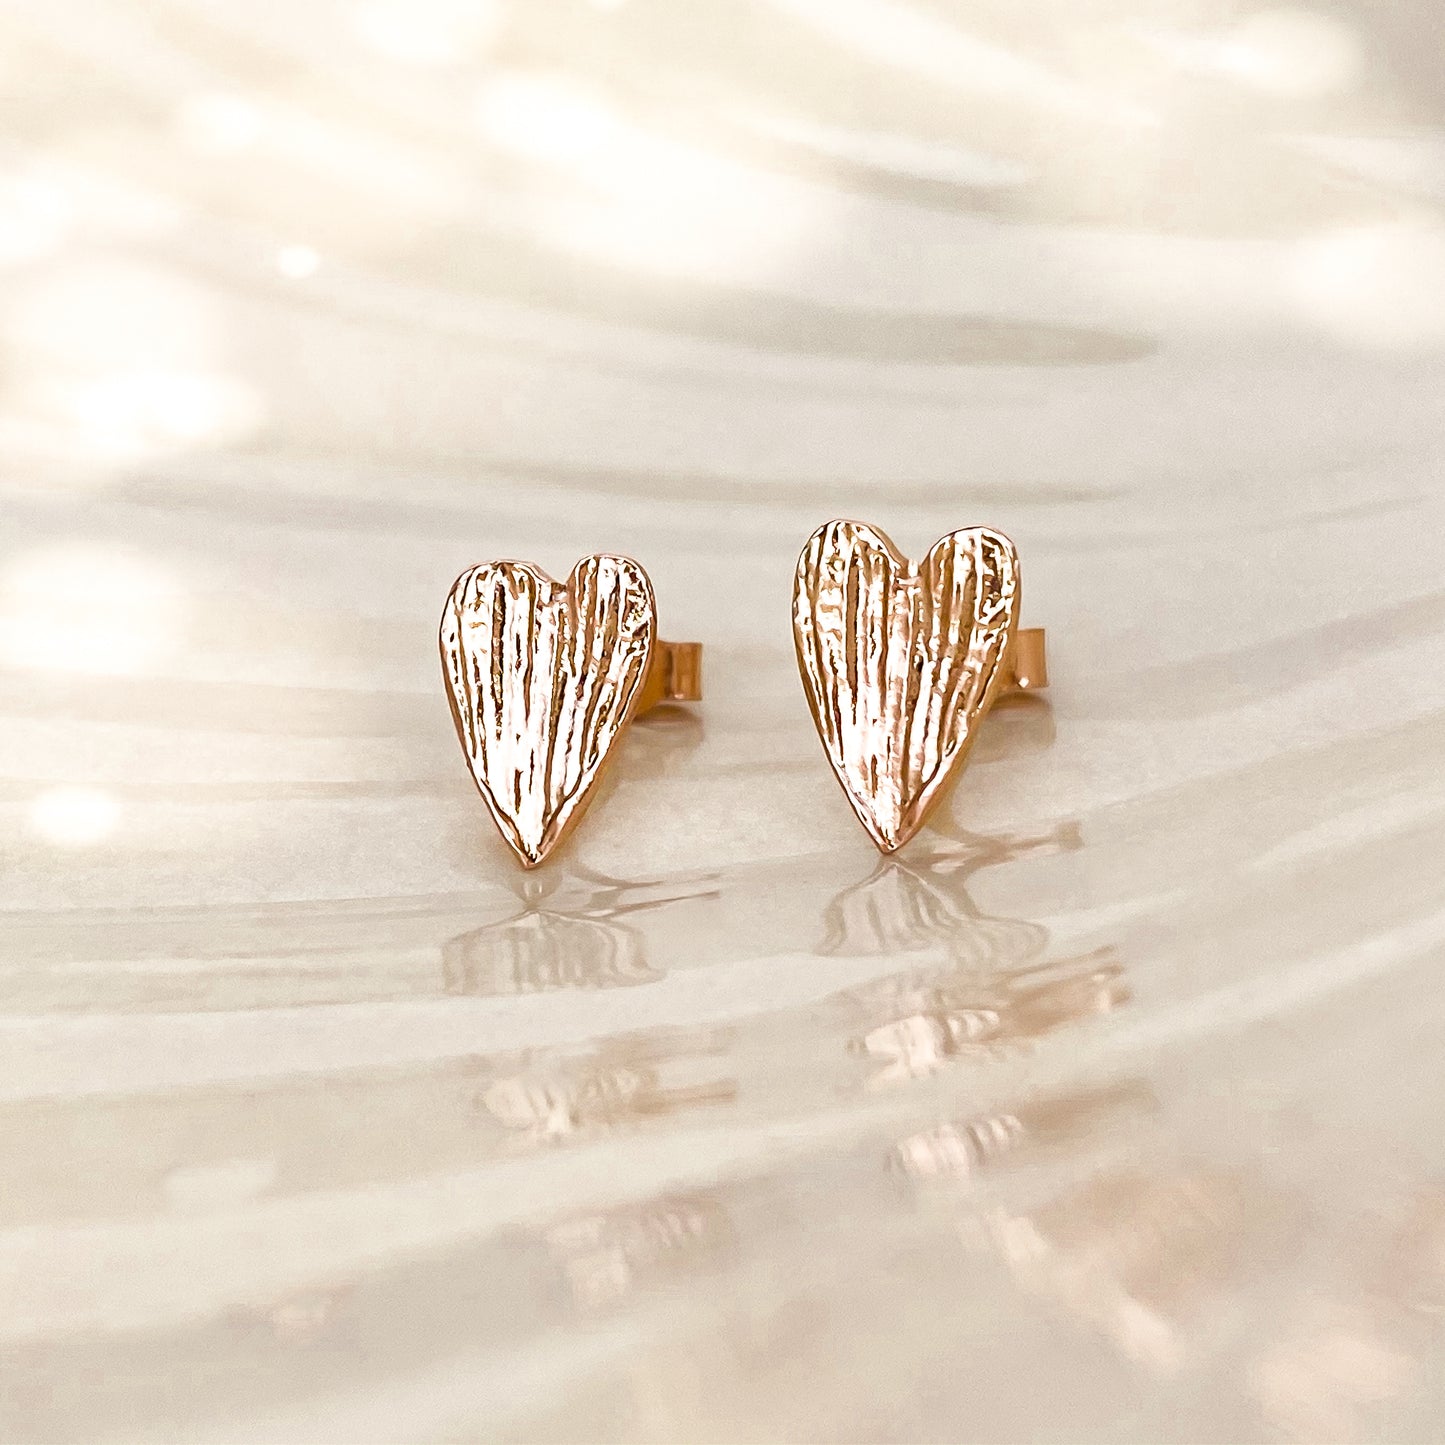 Gold Snowdrop Petal 'Heart' Earrings - Yellow, Rose or White Gold